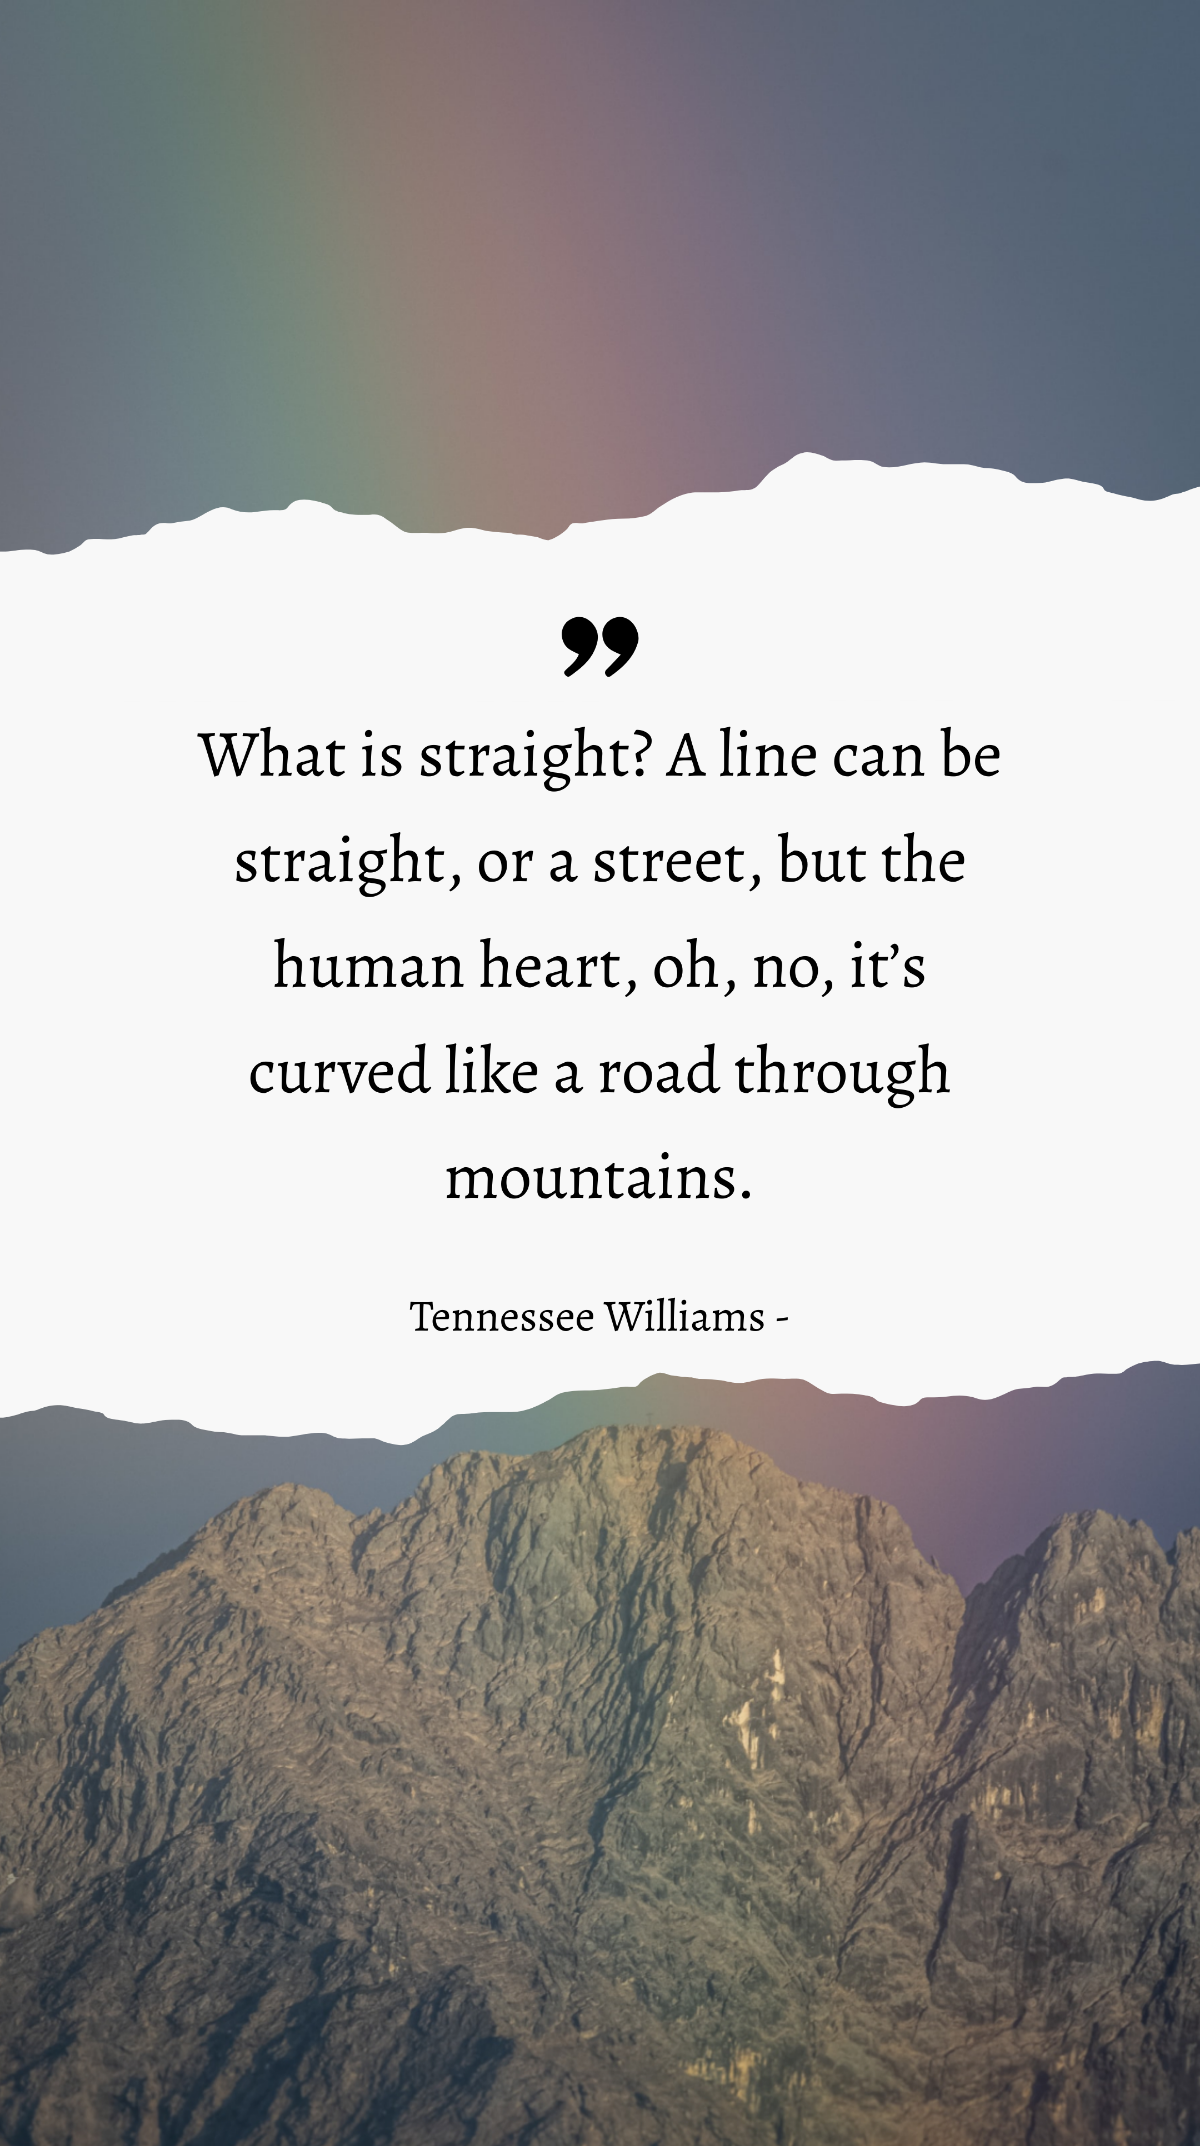 Tennessee Williams - What is straight? A line can be straight, or a street, but the human heart, oh, no, it’s curved like a road through mountains. Template